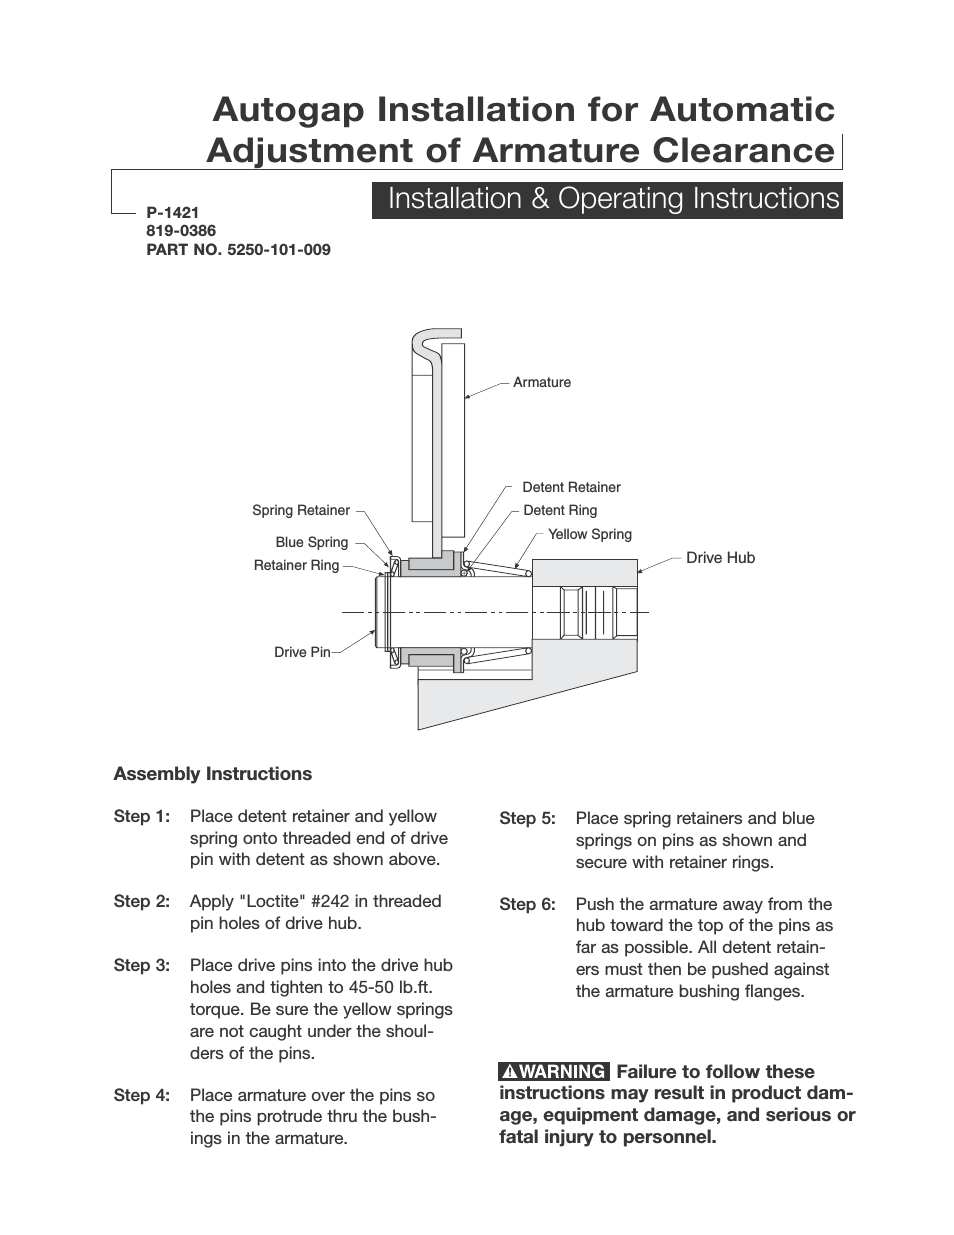 Autogap for Automatic Adjustment of Armature Clearance